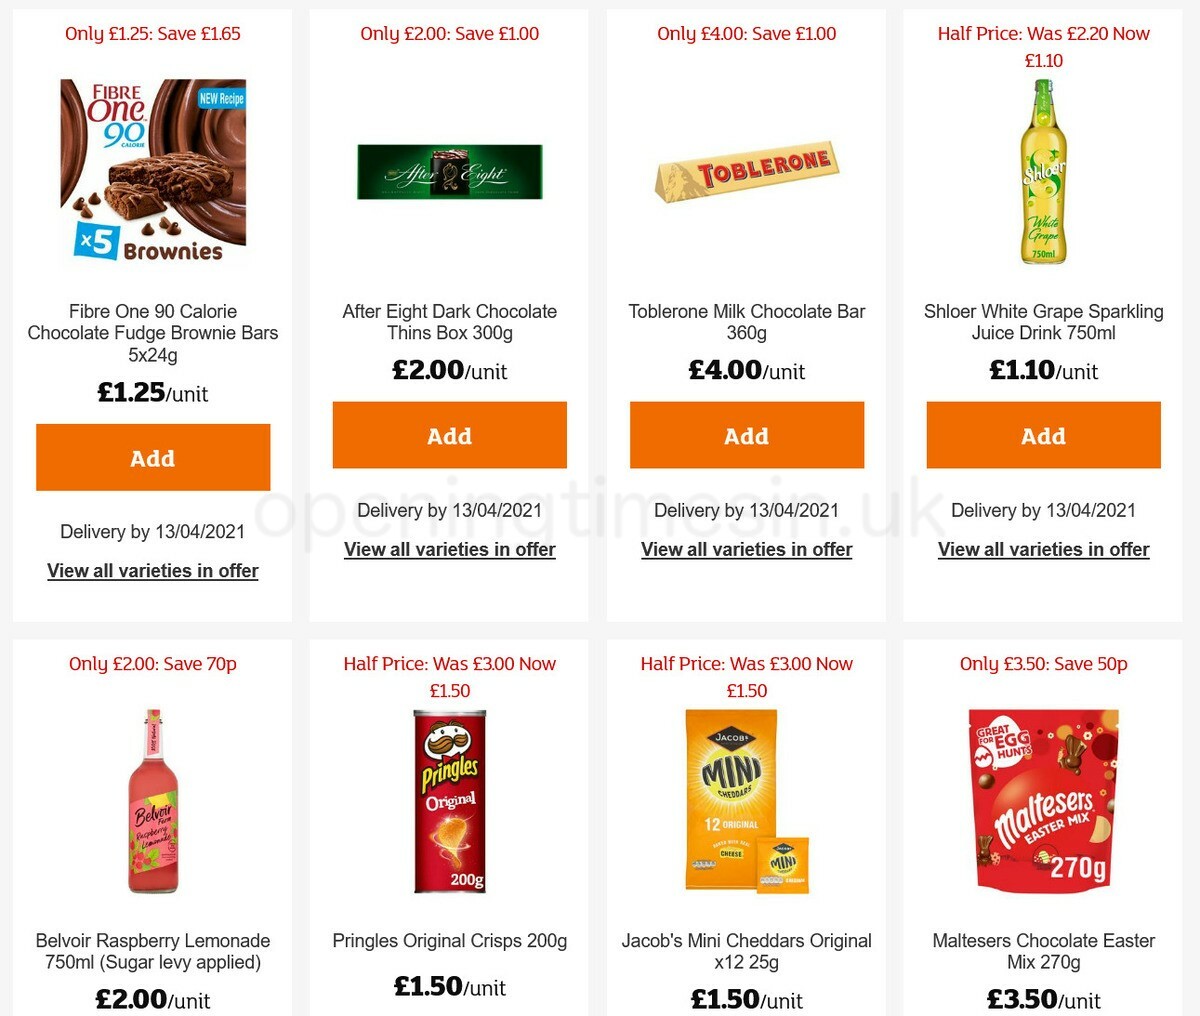 Sainsbury's Offers from 25 March